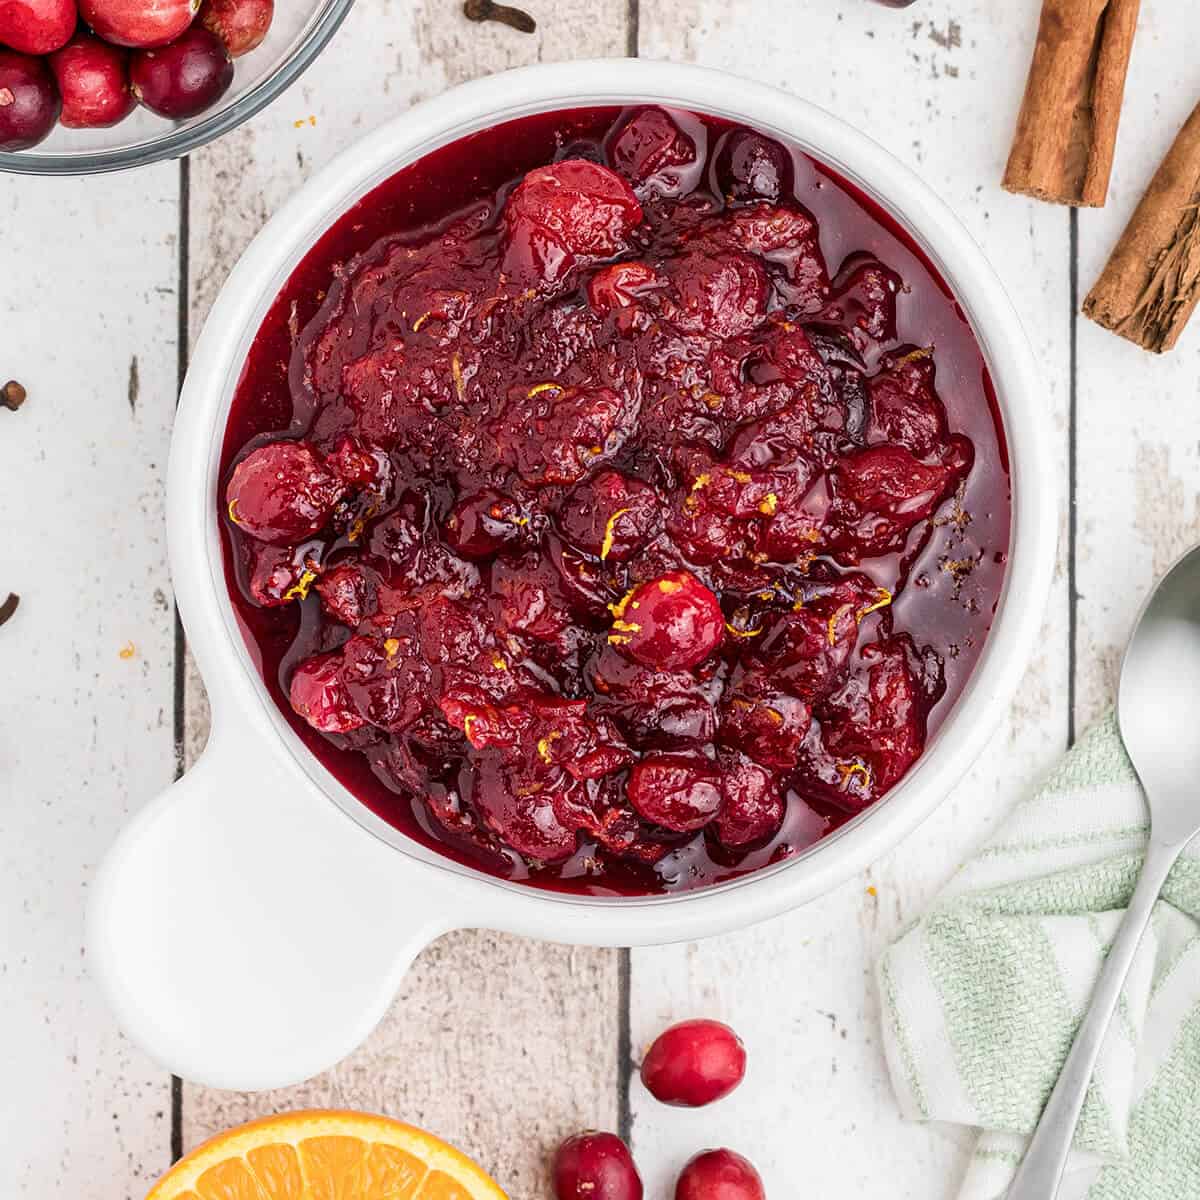 Cooled cranberry sauce in a white dish.